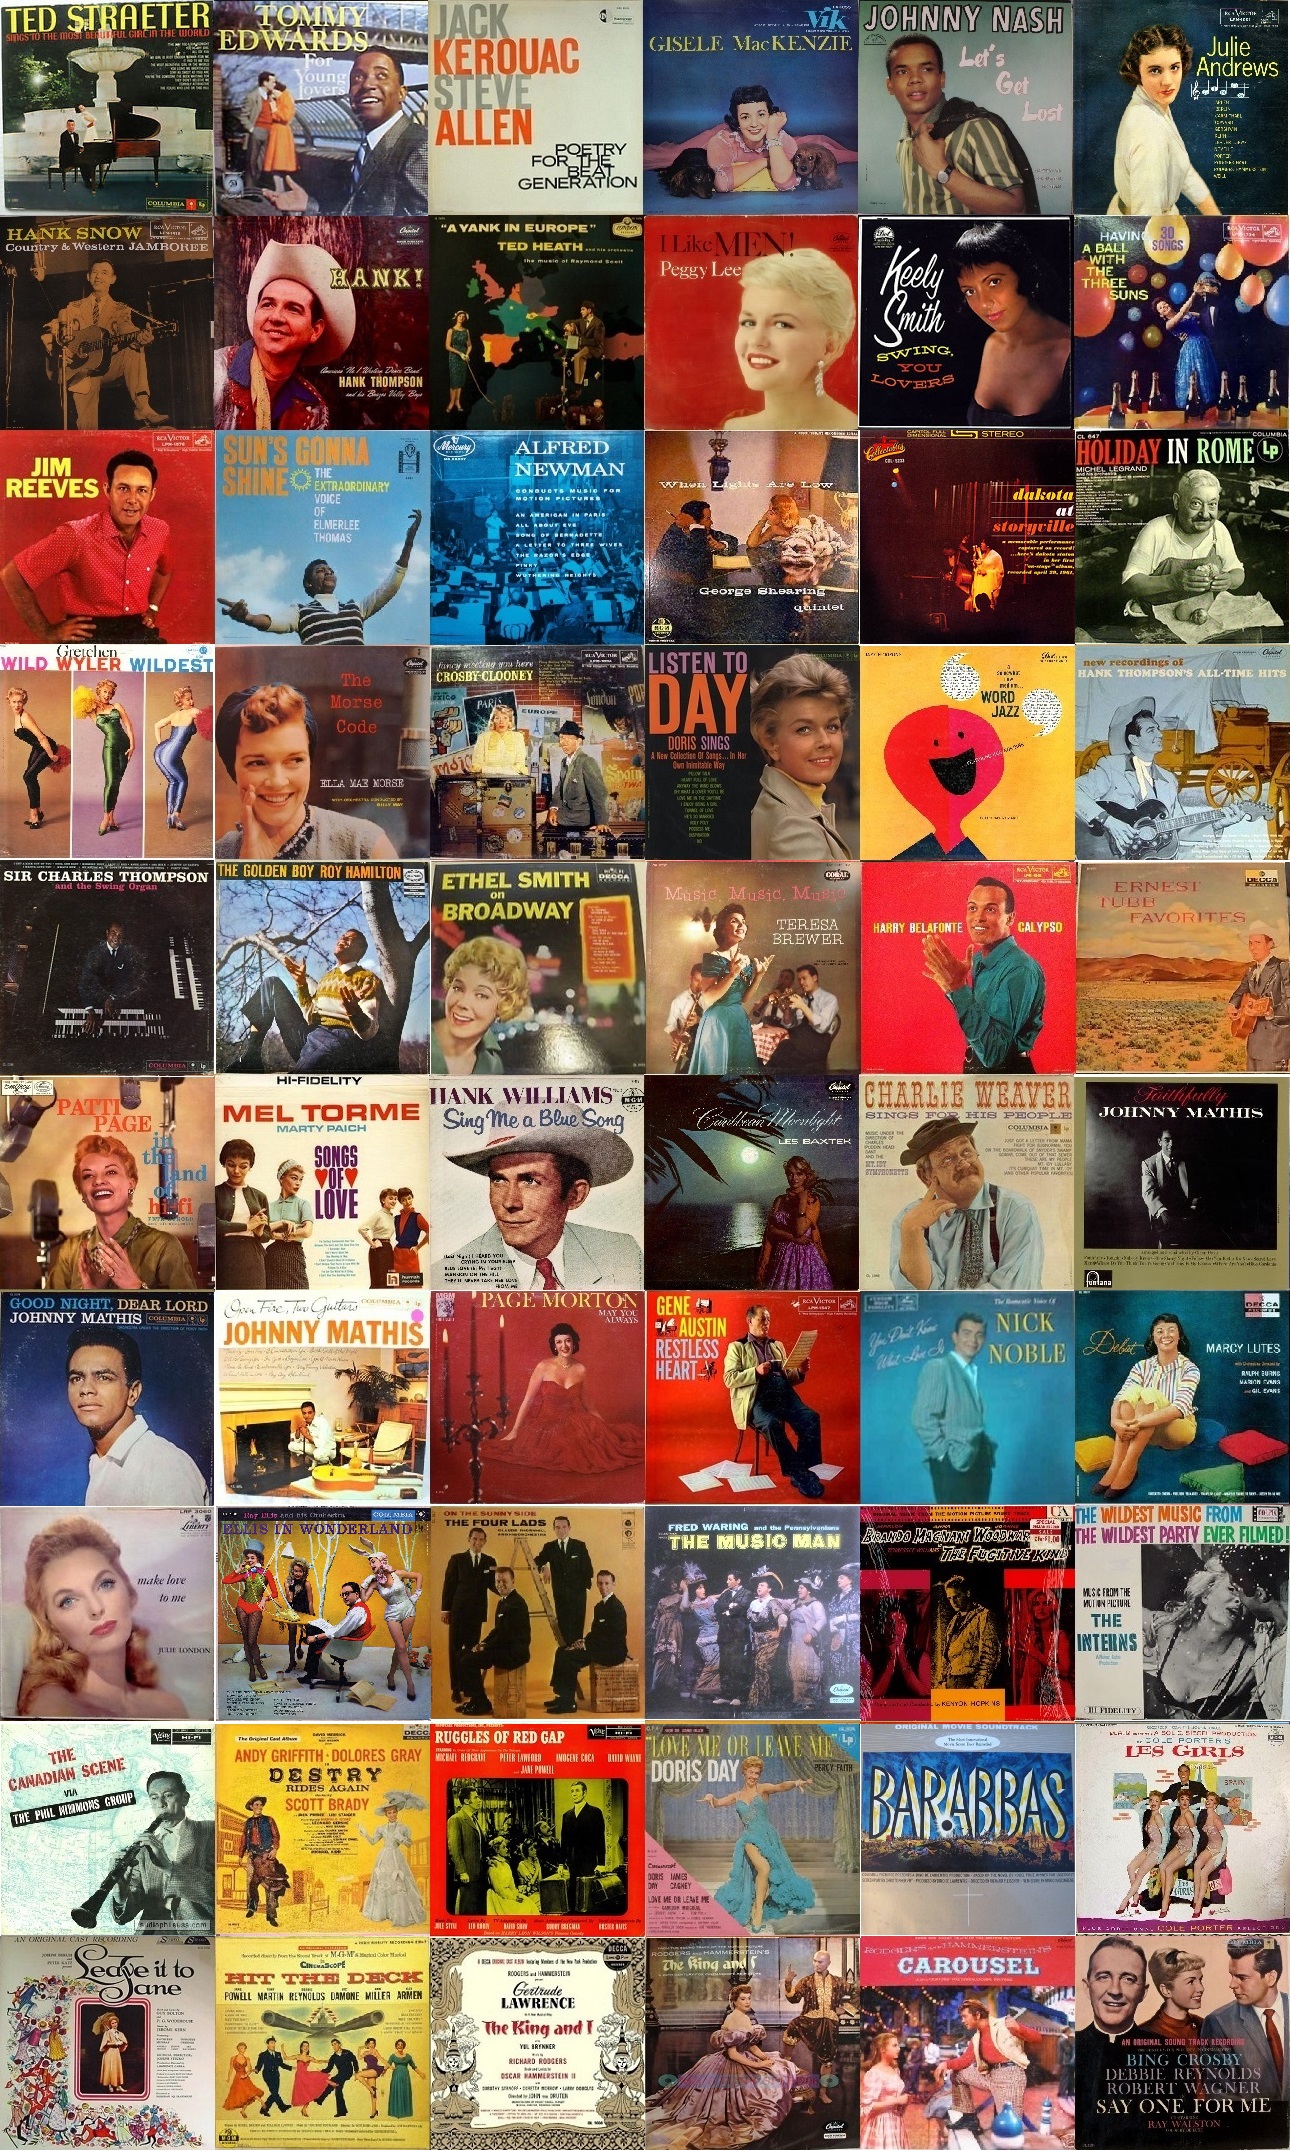 In Vintage Vinyl: 1963 we found a stand with 120 vinyl records (119 different ones). I did a little research on the covers and found half the number, most of them even in the shown mono version! Here is the result (Updated with the help of AKabaker for the items 06.10, 11.01 and 12.02). View full size.

01.01 Romantic
01.02 ??
01.03 Ted Straeter sings to the most beautiful girl in the world - Columbia 
01.04 ??
01.05 Ted Straeter sings to the most beautiful girl in the world - Columbia 
01.06 ??
01.07 Change??
01.08 ??
01.09 ??
01.10 ??
02.01 ??
02.02 ??
02.03 ??
02.04 ??
02.05 Tommy Edwards, For Young Lovers - MGM 
02.06 ??
02.07 ??
02.08 ??
02.09 ??
02.10 Jack Kerouac Steve Allen, Poetry for the beat generation - Hanover 
03.01 ??
03.02 Gisele McKenzie - Vik 
03.03 ??
03.04 ??
03.05 Johnny Nash, Let's Get Lost - ABC 
03.06 ??
03.07 Julie Andrews - RCA 
03.08 ??
03.09 Nick Trully?
03.10 ??
04.01 ??
04.02 Hank Snow Country & Western Jamboree - RCA 
04.03 Me
04.04 ??
04.05 Hank Thompson And His Brazos Valley Boys – Hank! - Capitol 
04.06 Ted Heath - A Yank in Europe - London 
04.07 ??
04.08 Peggy Lee – I like MEN! - Capitol 
04.09 ??
04.10 Keely Smith - Swing you lovers - Dot 
05.01 Having A Ball With The Three Suns - RCA 
05.02 ??
05.03 ??
05.04 Alice in wonderland
05.05 ??
05.06 ??
05.07 ??
05.08 ??
05.09 Year of love
05.10 ??
06.01 Jim Reeves - RCA 
06.02 ??
06.03 ??
06.04 Sun's Gonna Shine – The extraordinary voice of Elmerlee Thomas - WB 
06.05 Alfred Newman conducts music for motion pictures - Mercury 
06.06 ??
06.07 Southern?
06.08 George Shearing Quintet, The – When Lights Are Low - MGM 
06.09 ??
06.10 Dakota Stanton - Dakota at Storyville - Capitol 
07.01 Michel Legrand And His Orchestra – Holiday In Rome - Columbia 
07.02 ? Streep?
07.03 Gretchen Wyler - Wild Wyler Wildest - Jubilee 
07.04 ?ely Smith swingin'
07.05 Ella Mae Morse - Morse Code - Capitol 
07.06 Bing Crosby & Rosemary Clooney, Fancy Meeting You Here - RCA 
07.07 Beat
07.08 Listen To Day - Doris Sings A New Collection Of Songs - Columbia 
07.09 ??
07.10 Word Jazz, featuring Ken Nordine and the Fred Katz Group - Dot 
08.01 New Recordings Of Hank Thompson's All-Time Hits - Capitol 
08.02 ??
08.03 Sir Charles Thompson And The Swing Organ - Columbia 
08.04 ?ni and his orchestra
08.05 The golden boy Roy Hamilton - Epic 
08.06 Ethel Smith on Broadway - Decca 
08.07 Teresa Brewer Music, Music, Music - Coral 
08.08 ??
08.09 ??
08.10 Harry Belafonte - Calypso - RCA 
09.01 Keys Alicirif
09.02 ??
09.03 Ernest Tubb Favorites - Decca 
09.04 Patti Page, In The Land Of Hi-Fi - EmArcy-Mercury 
09.05 Mel Torme & Marty Paich – Songs Of Love - Hurrah 
09.06 Hank Williams, Sing me a blue song – MGM
09.07 ??
09.08 ??
09.09 Les Baxter – Caribbean Moonlight – Capitol
09.10 Charlie Weaver sings for his people - Columbia
10.01 Johnny Mathis – Faithfully – Fontana
10.02 Johnny Mathis, Good night, Dear Lord - Columbia 
10.03 Johnny Mathis - Open Fire, Two Guitars - Columbia 
10.04 ??
10.05 JO
10.06 Page Morton, May you always - MGM 
10.07 Gene Austin – Restless Heart - RCA Victor 
10.08 Nick Noble - The romantic voice of Nick Noble – You don't know what love is - Mercury
10.09 Marcy Lutes – Debut – Decca
10.10 Julie London – Make love to me – Liberty
11.01 Ray Ellis & His Orchestra - Ellis in Wonderland -Columbia 
11.02 The Four Lads, Cl. Thornhill & Orchestra – On The Sunny Side - Columbia 
11.03 Fred Waring and the Pennsylvanians - the music man – Capitol
11.04 Kenyon Hopkins – The Fugitive Kind – Motion picture sound track - UA 
11.05 ??vers and ??
11.06 The Interns - the wildest music fom the wildest party ever filmed – Music from the motion picture – Colpix
11.07 Phil Nimmons – The Canadian Scene via the Phil Nimmons Group – Verve
11.08 --- Hal Stanley ----
11.09 Andy Griffith, Dolores Gray, in Destry Rides Again – Decca
11.10 Ruggles Of Red Gap  – Original Cast Recording – Verve
12.01 Doris Day – Love Me Or Leave Me – Columbia
12.02 Barabbas -Original Movie Soundtrack - Colpix Records 
12.03 Les Girls, Recorded from the sound track of Cole Porter's – MGM
12.04 ??
12.05 Leave it to Jane – An original cast recording - Strand 
12.06 Hit the Deck – Recorded directly from the Sound Track of M-G-M's Magical Color Musical – MGM
12.07 Gertrude Lawrence - The King and I - Decca
12.08 Rodgers and Hammerstein's The King and I –  from the Sound Track of the motion picture – Capitol
12.09 Rodgers & Hammerstein's Carousel – Capitol
12.10 Bing Crosby, Debbie Reynolds, Robert Wagner — Say One For Me – Columbia


